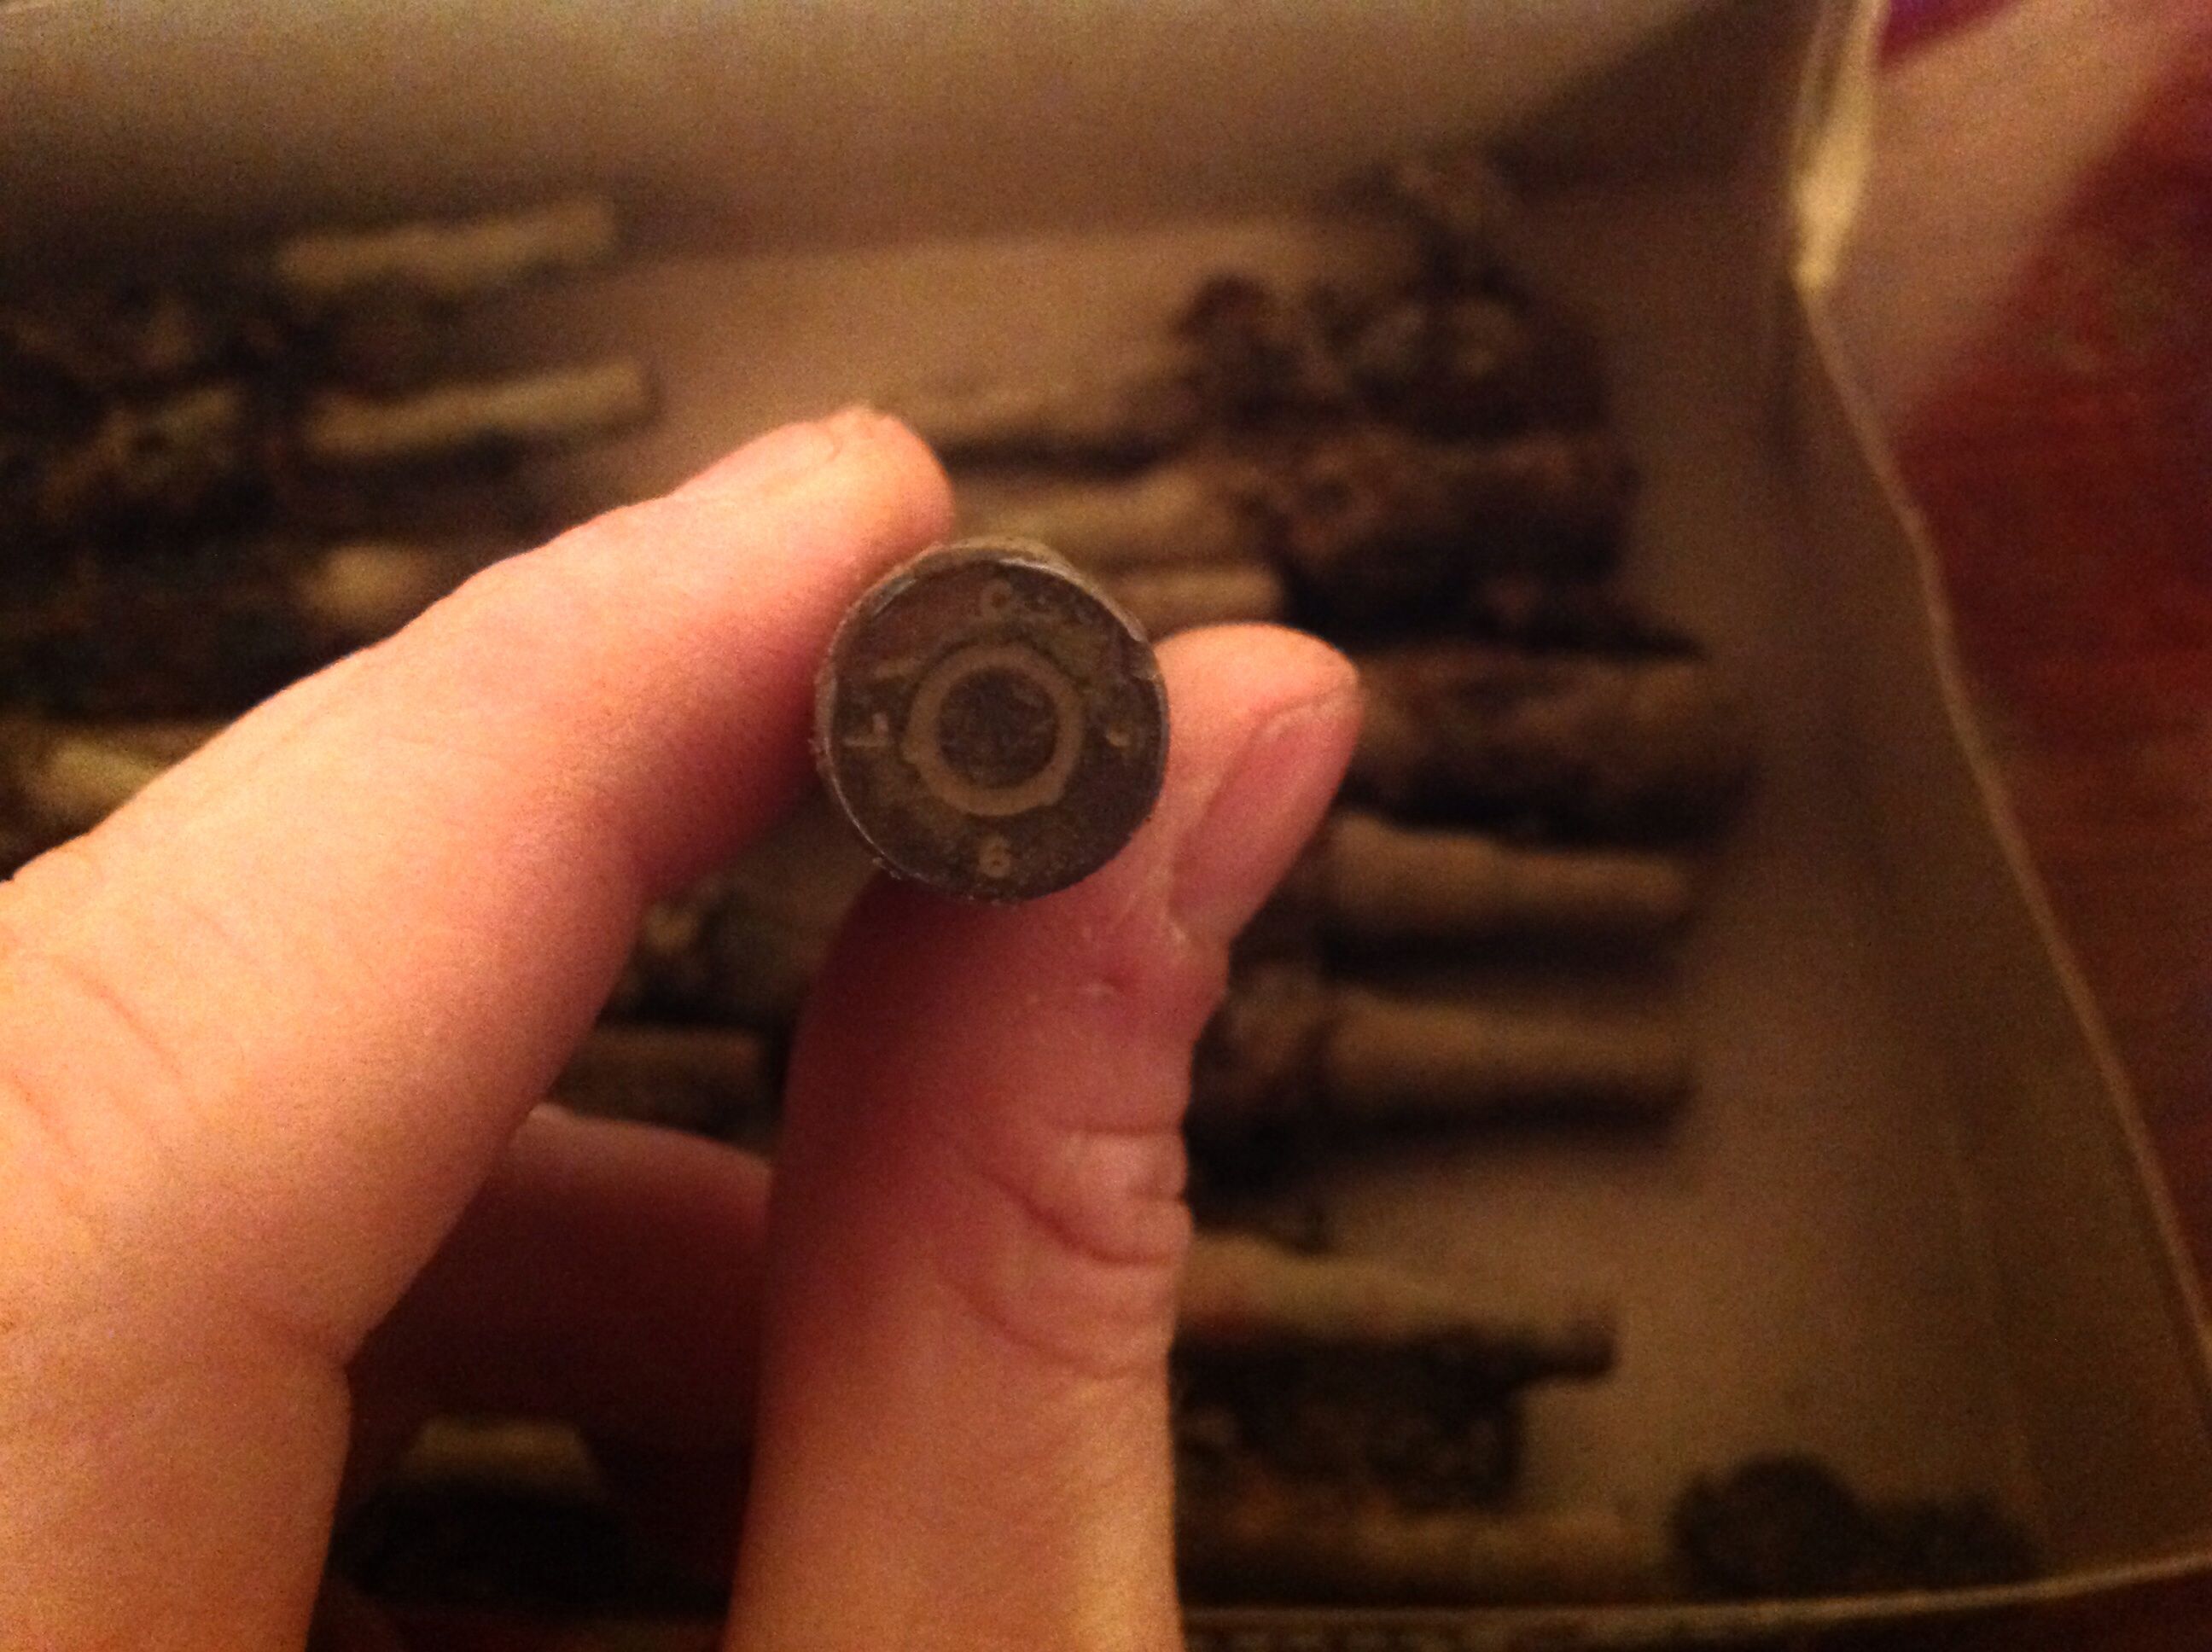 .308 blanks dug up at a park in Indiana